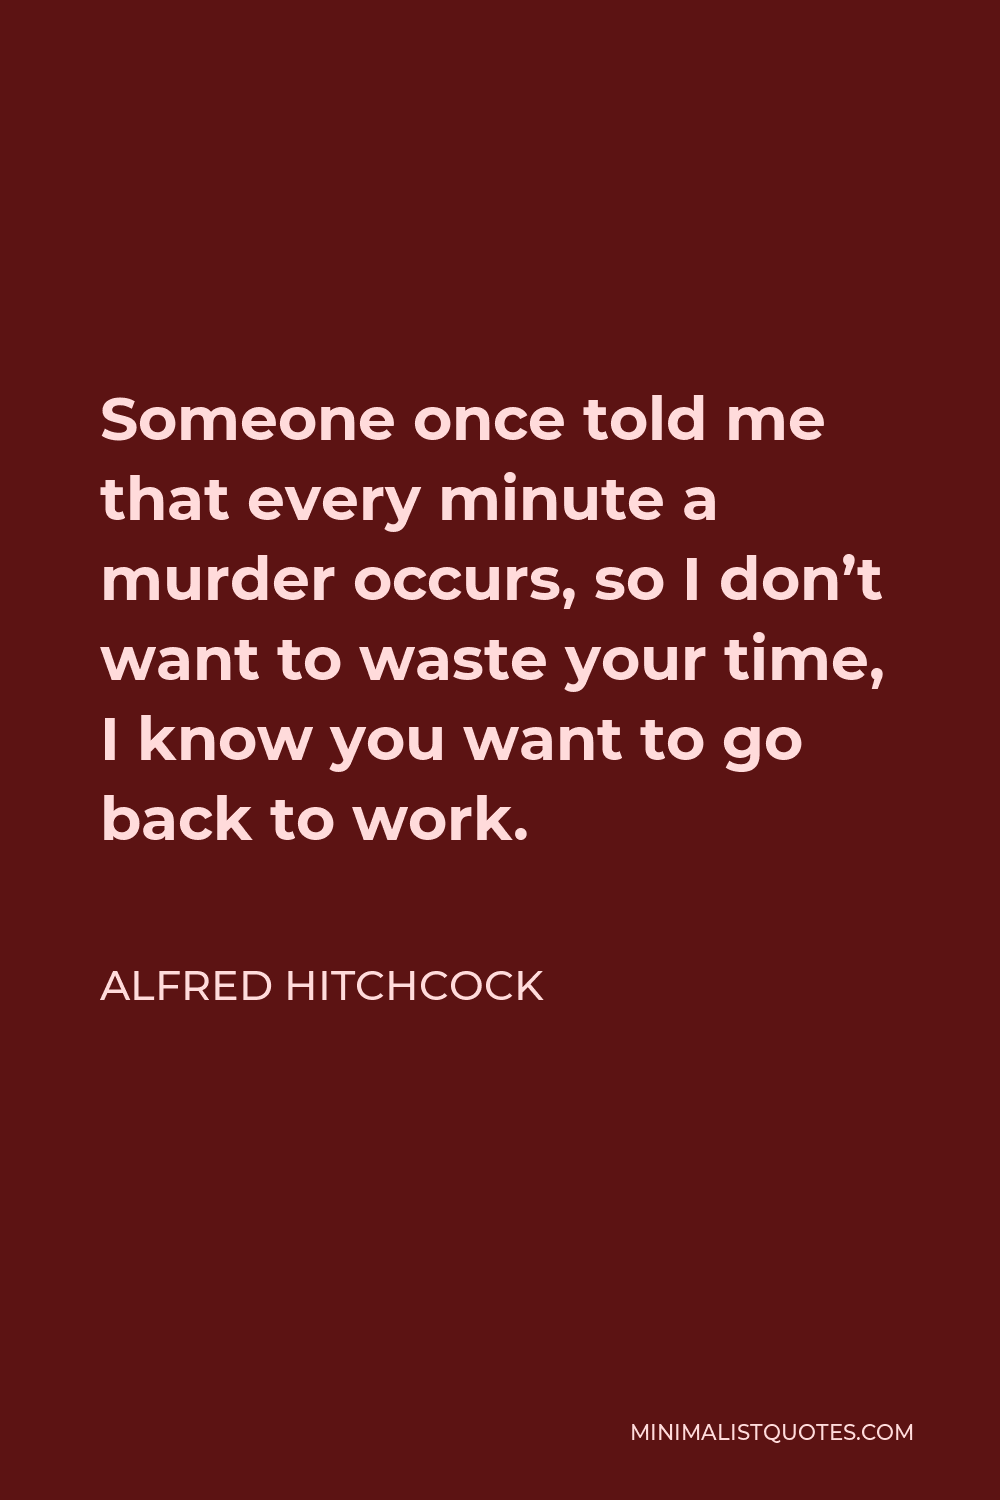 Alfred Hitchcock Quote - Someone once told me that every minute a murder occurs, so I don’t want to waste your time, I know you want to go back to work.